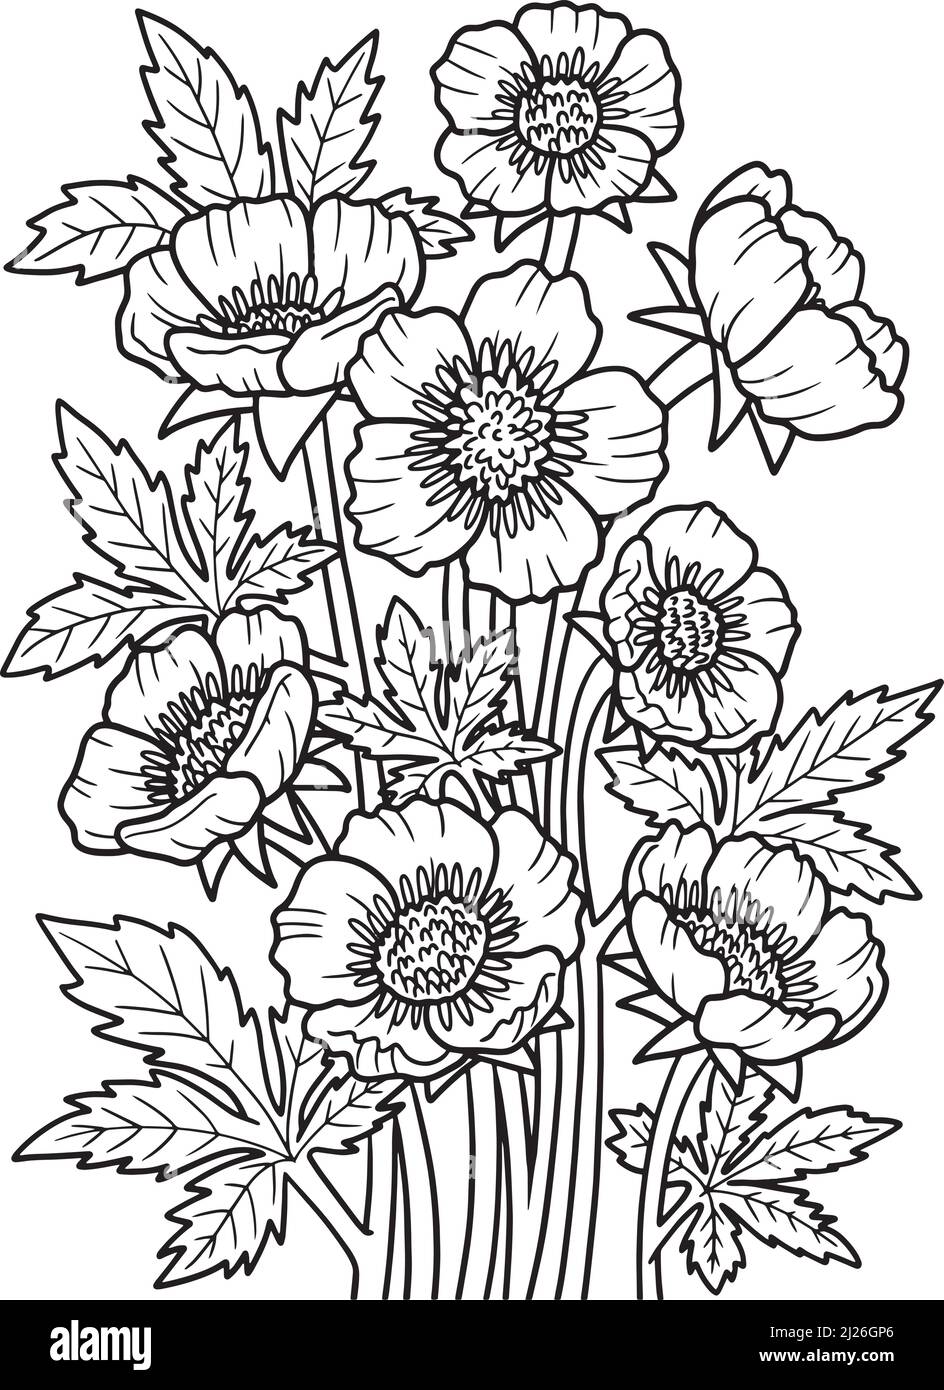 Bulbous Buttercup Flower Coloring Page for Adults Stock Vector